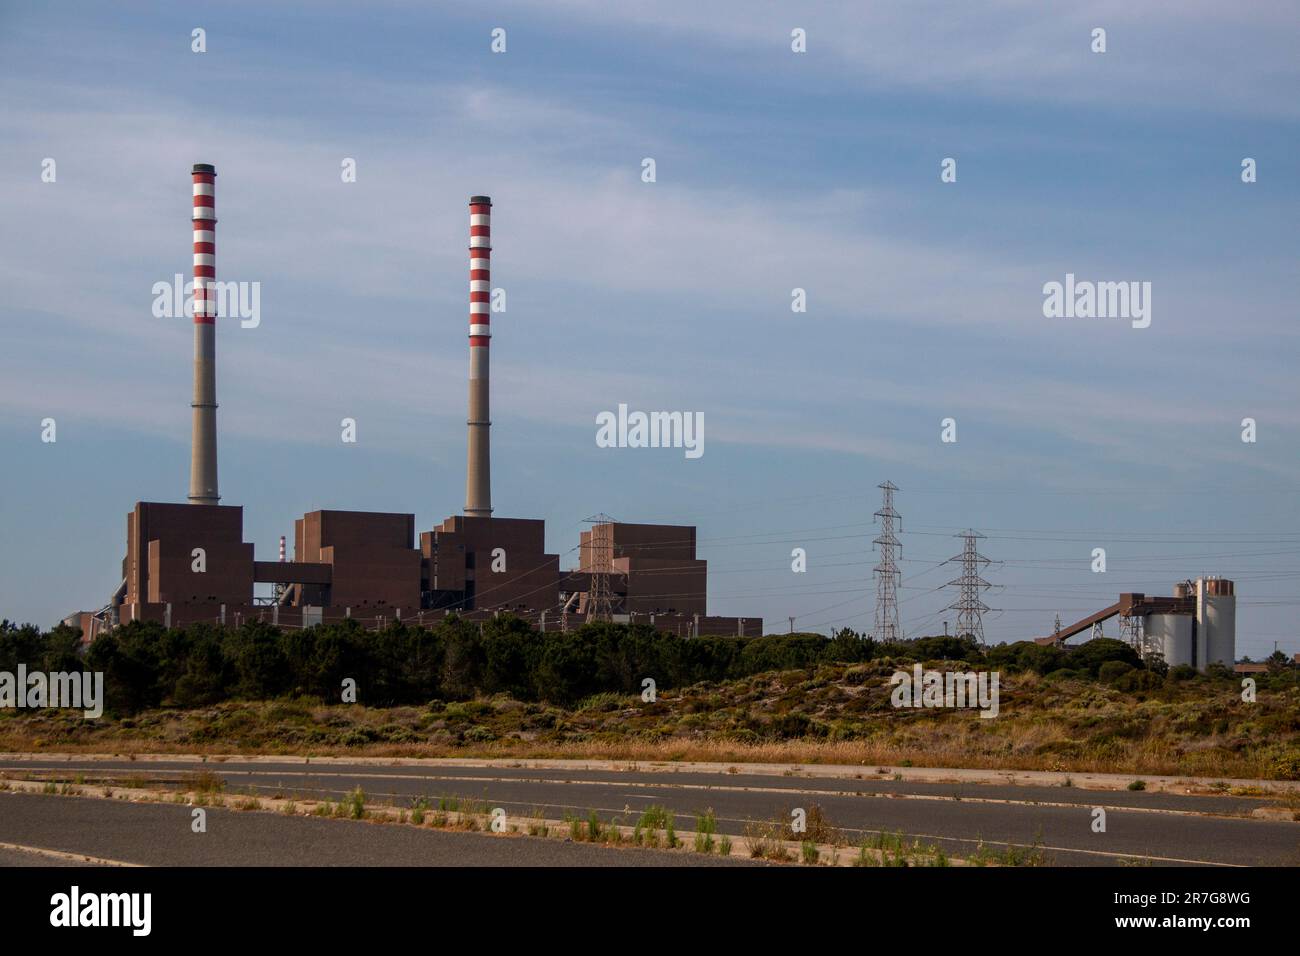 Industrial plant. Factory producing electricity with two huge chimneys Stock Photo